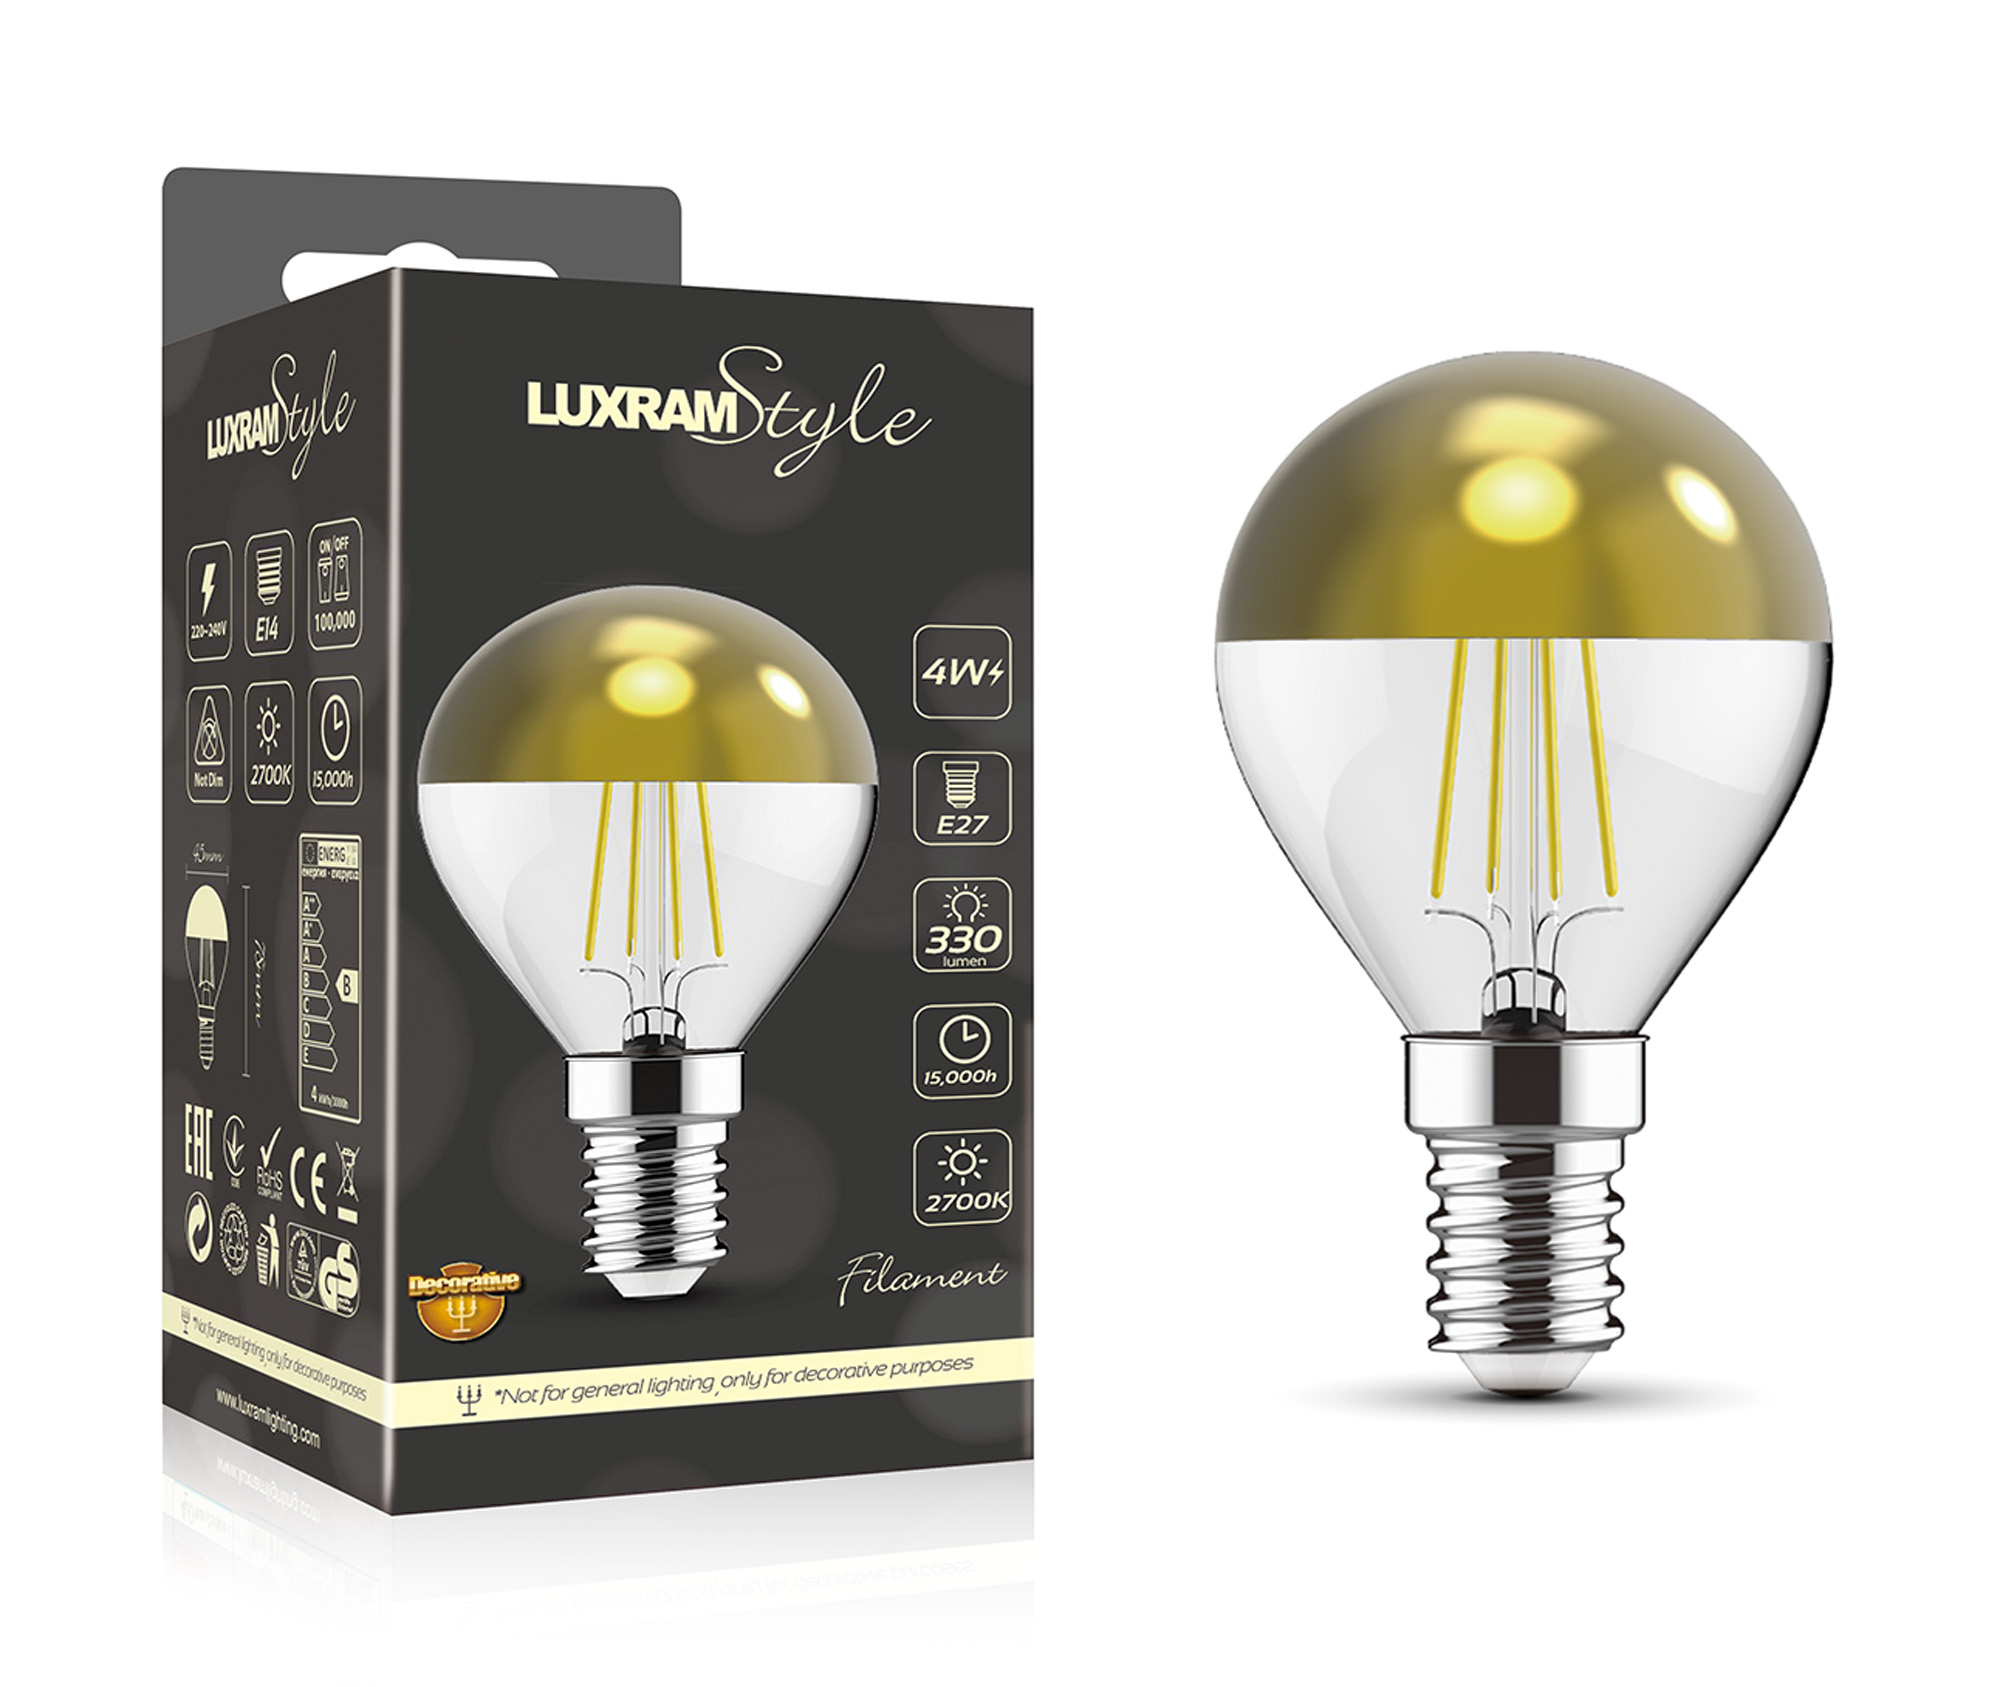 Classic Style LED Lamps Luxram Golf Ball